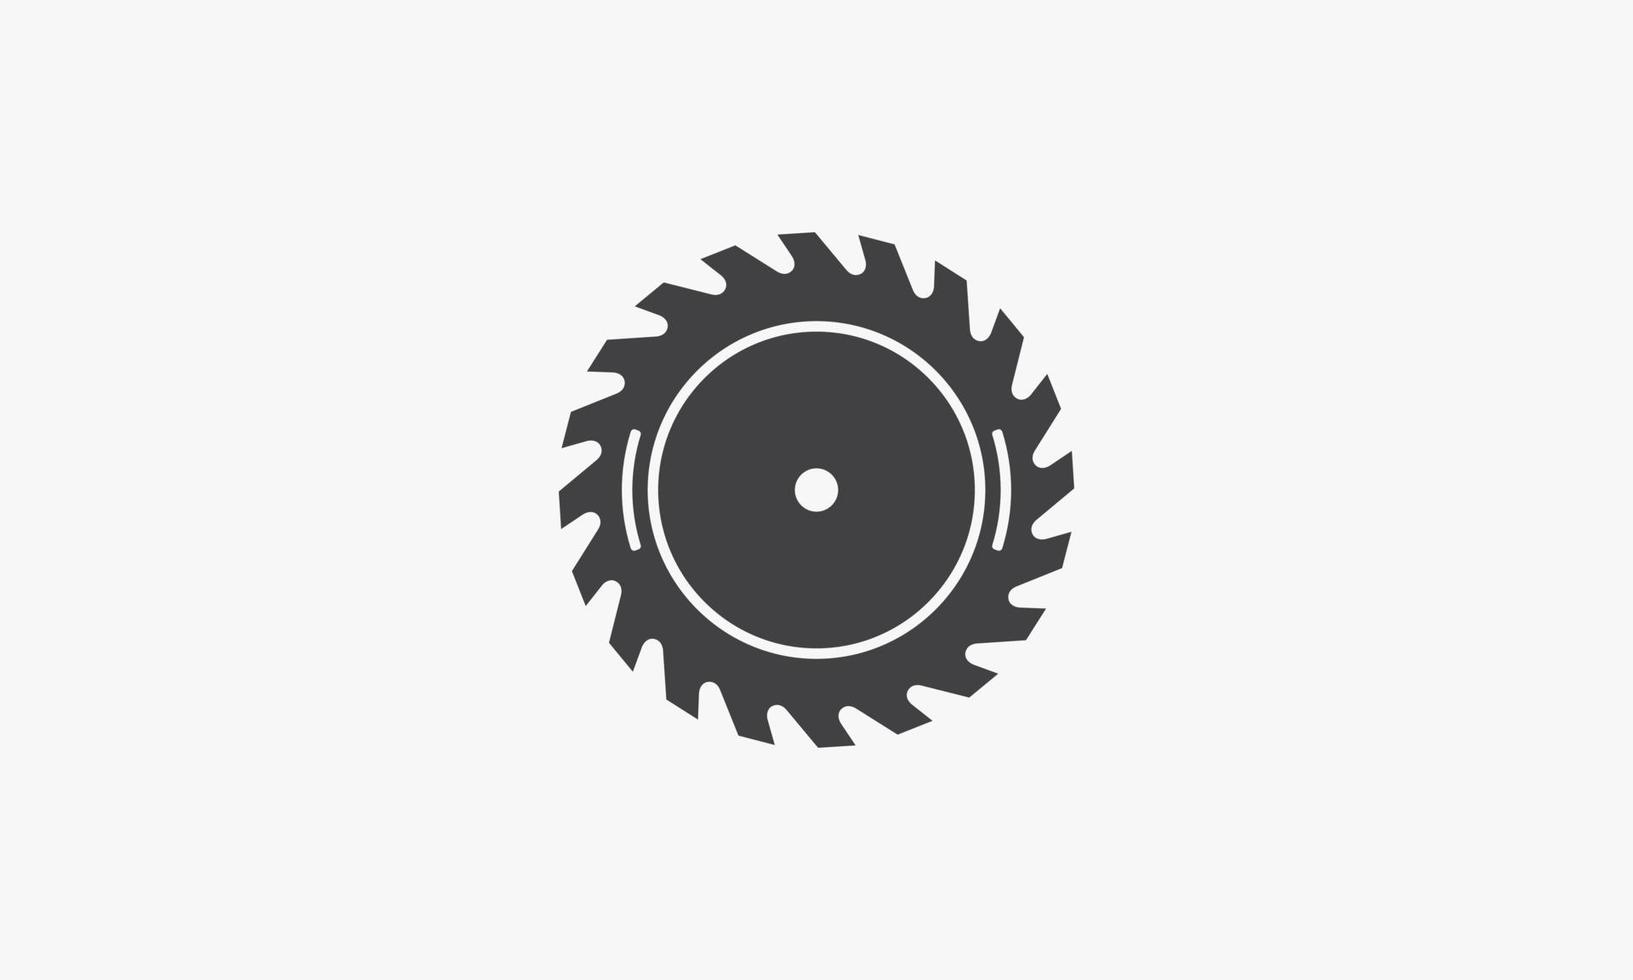 circular saw icon. vector illustration. isolated on white background.